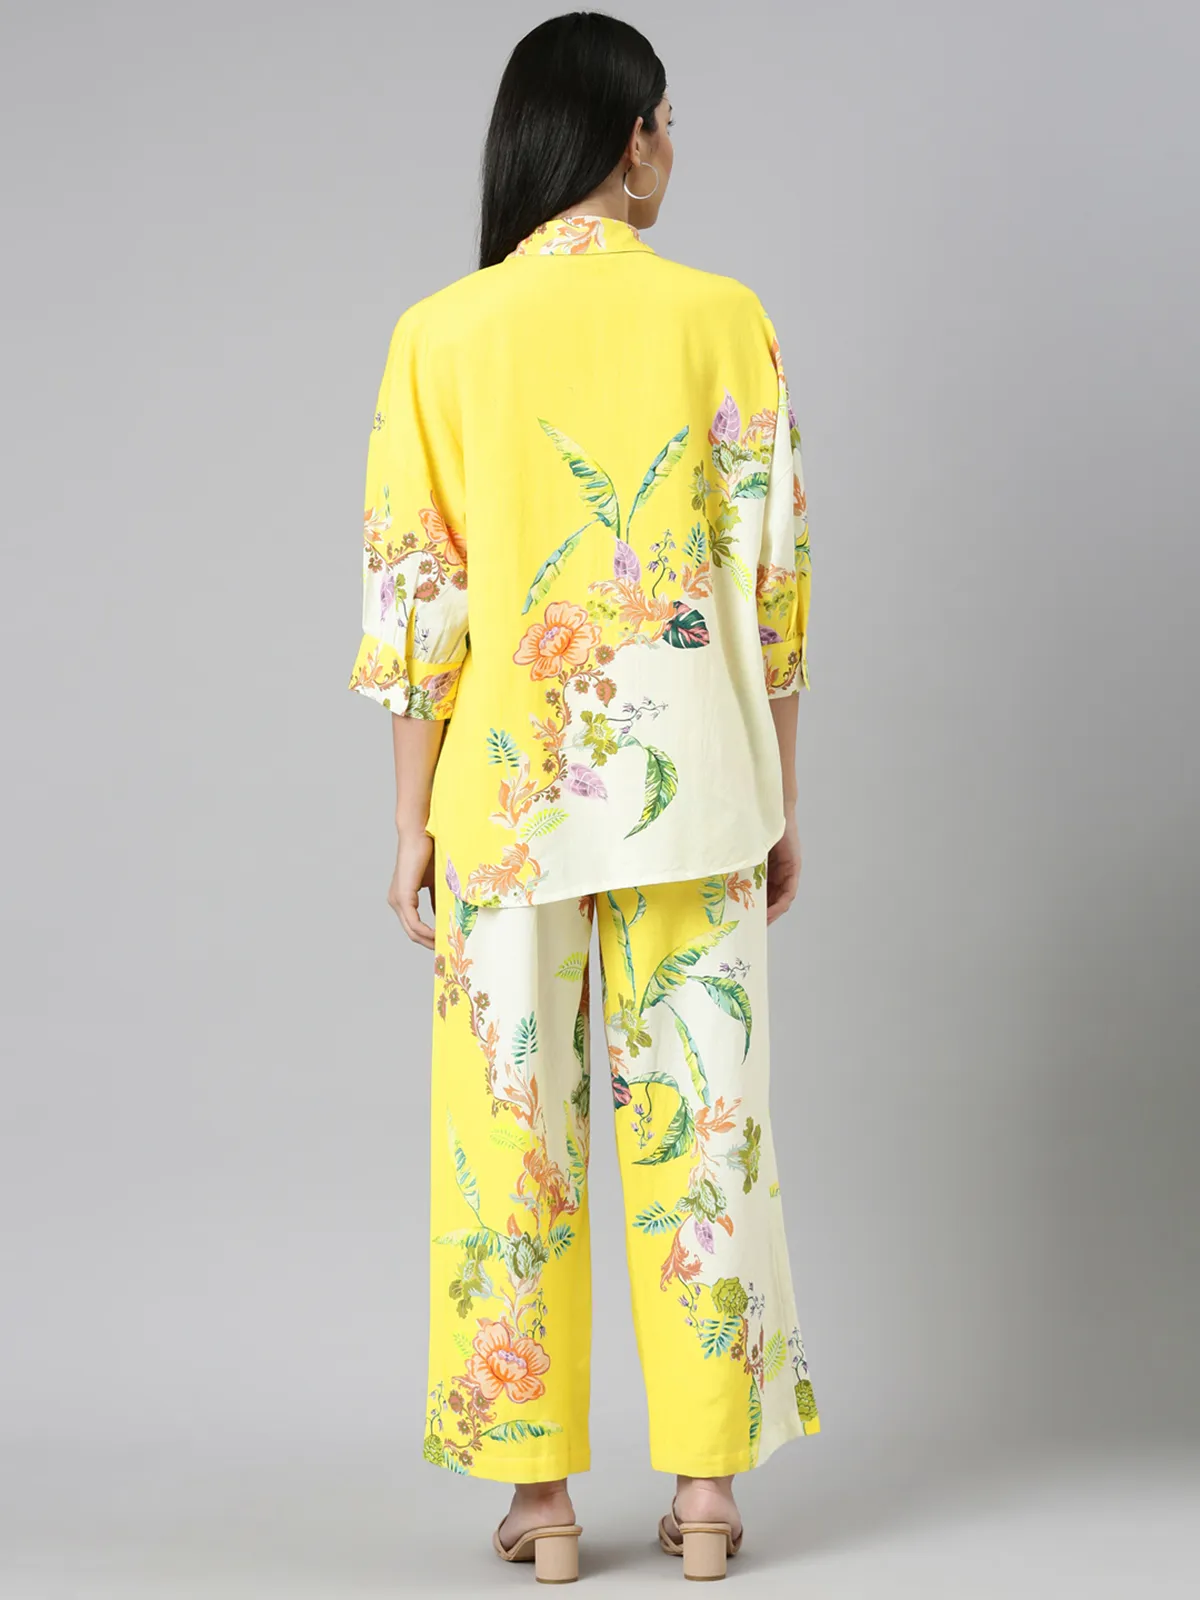 Classy yellow cotton printed co-ord set